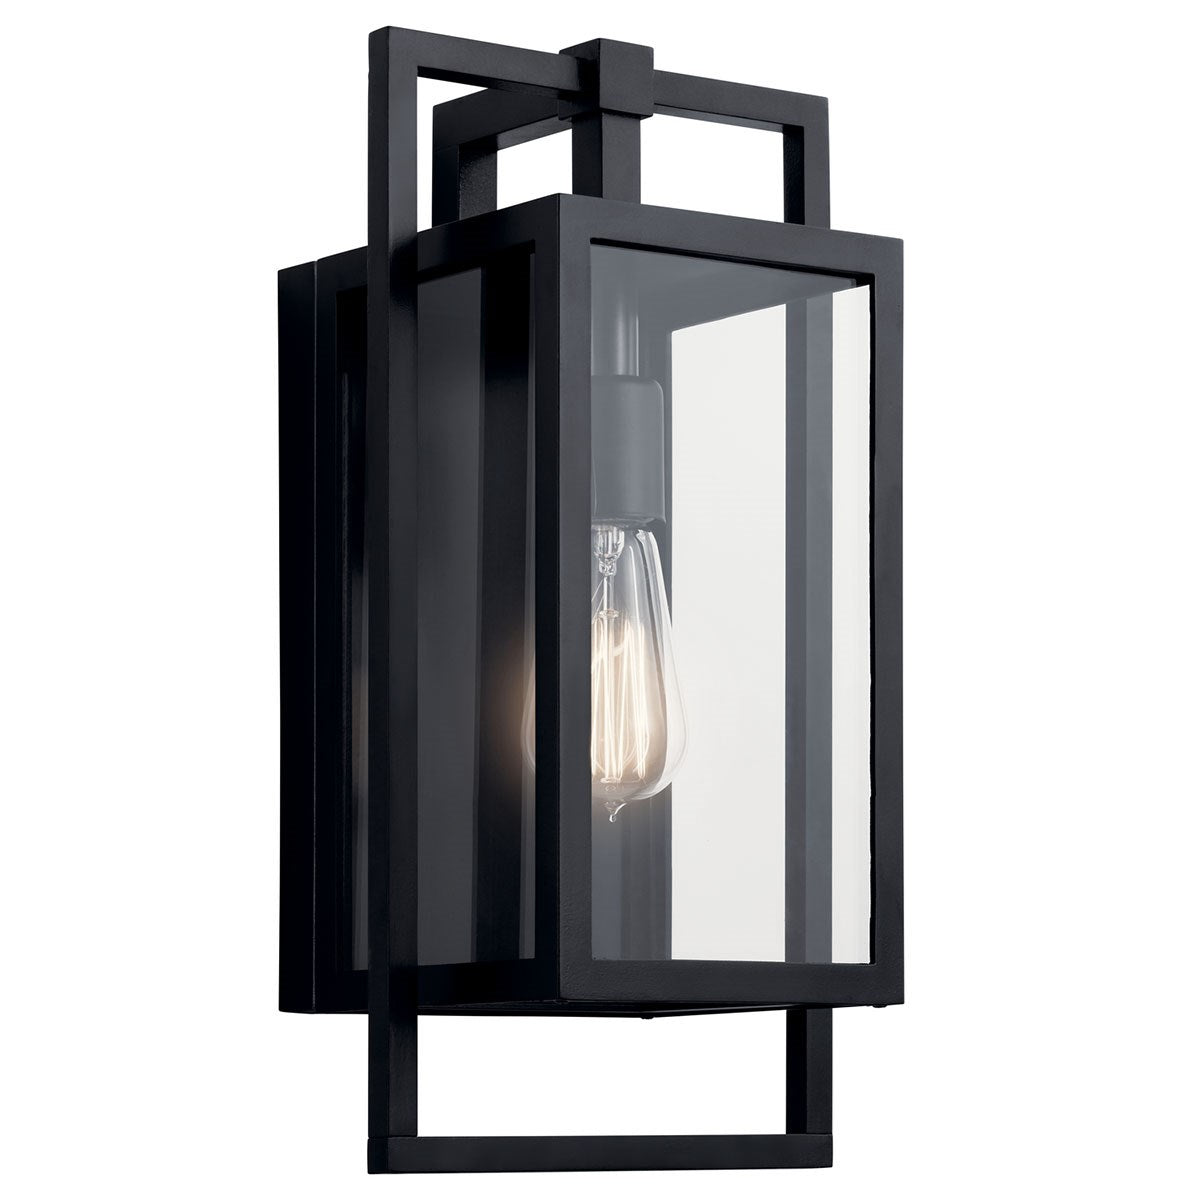 Goson 16 in. Outdoor Wall Sconce Black Finish